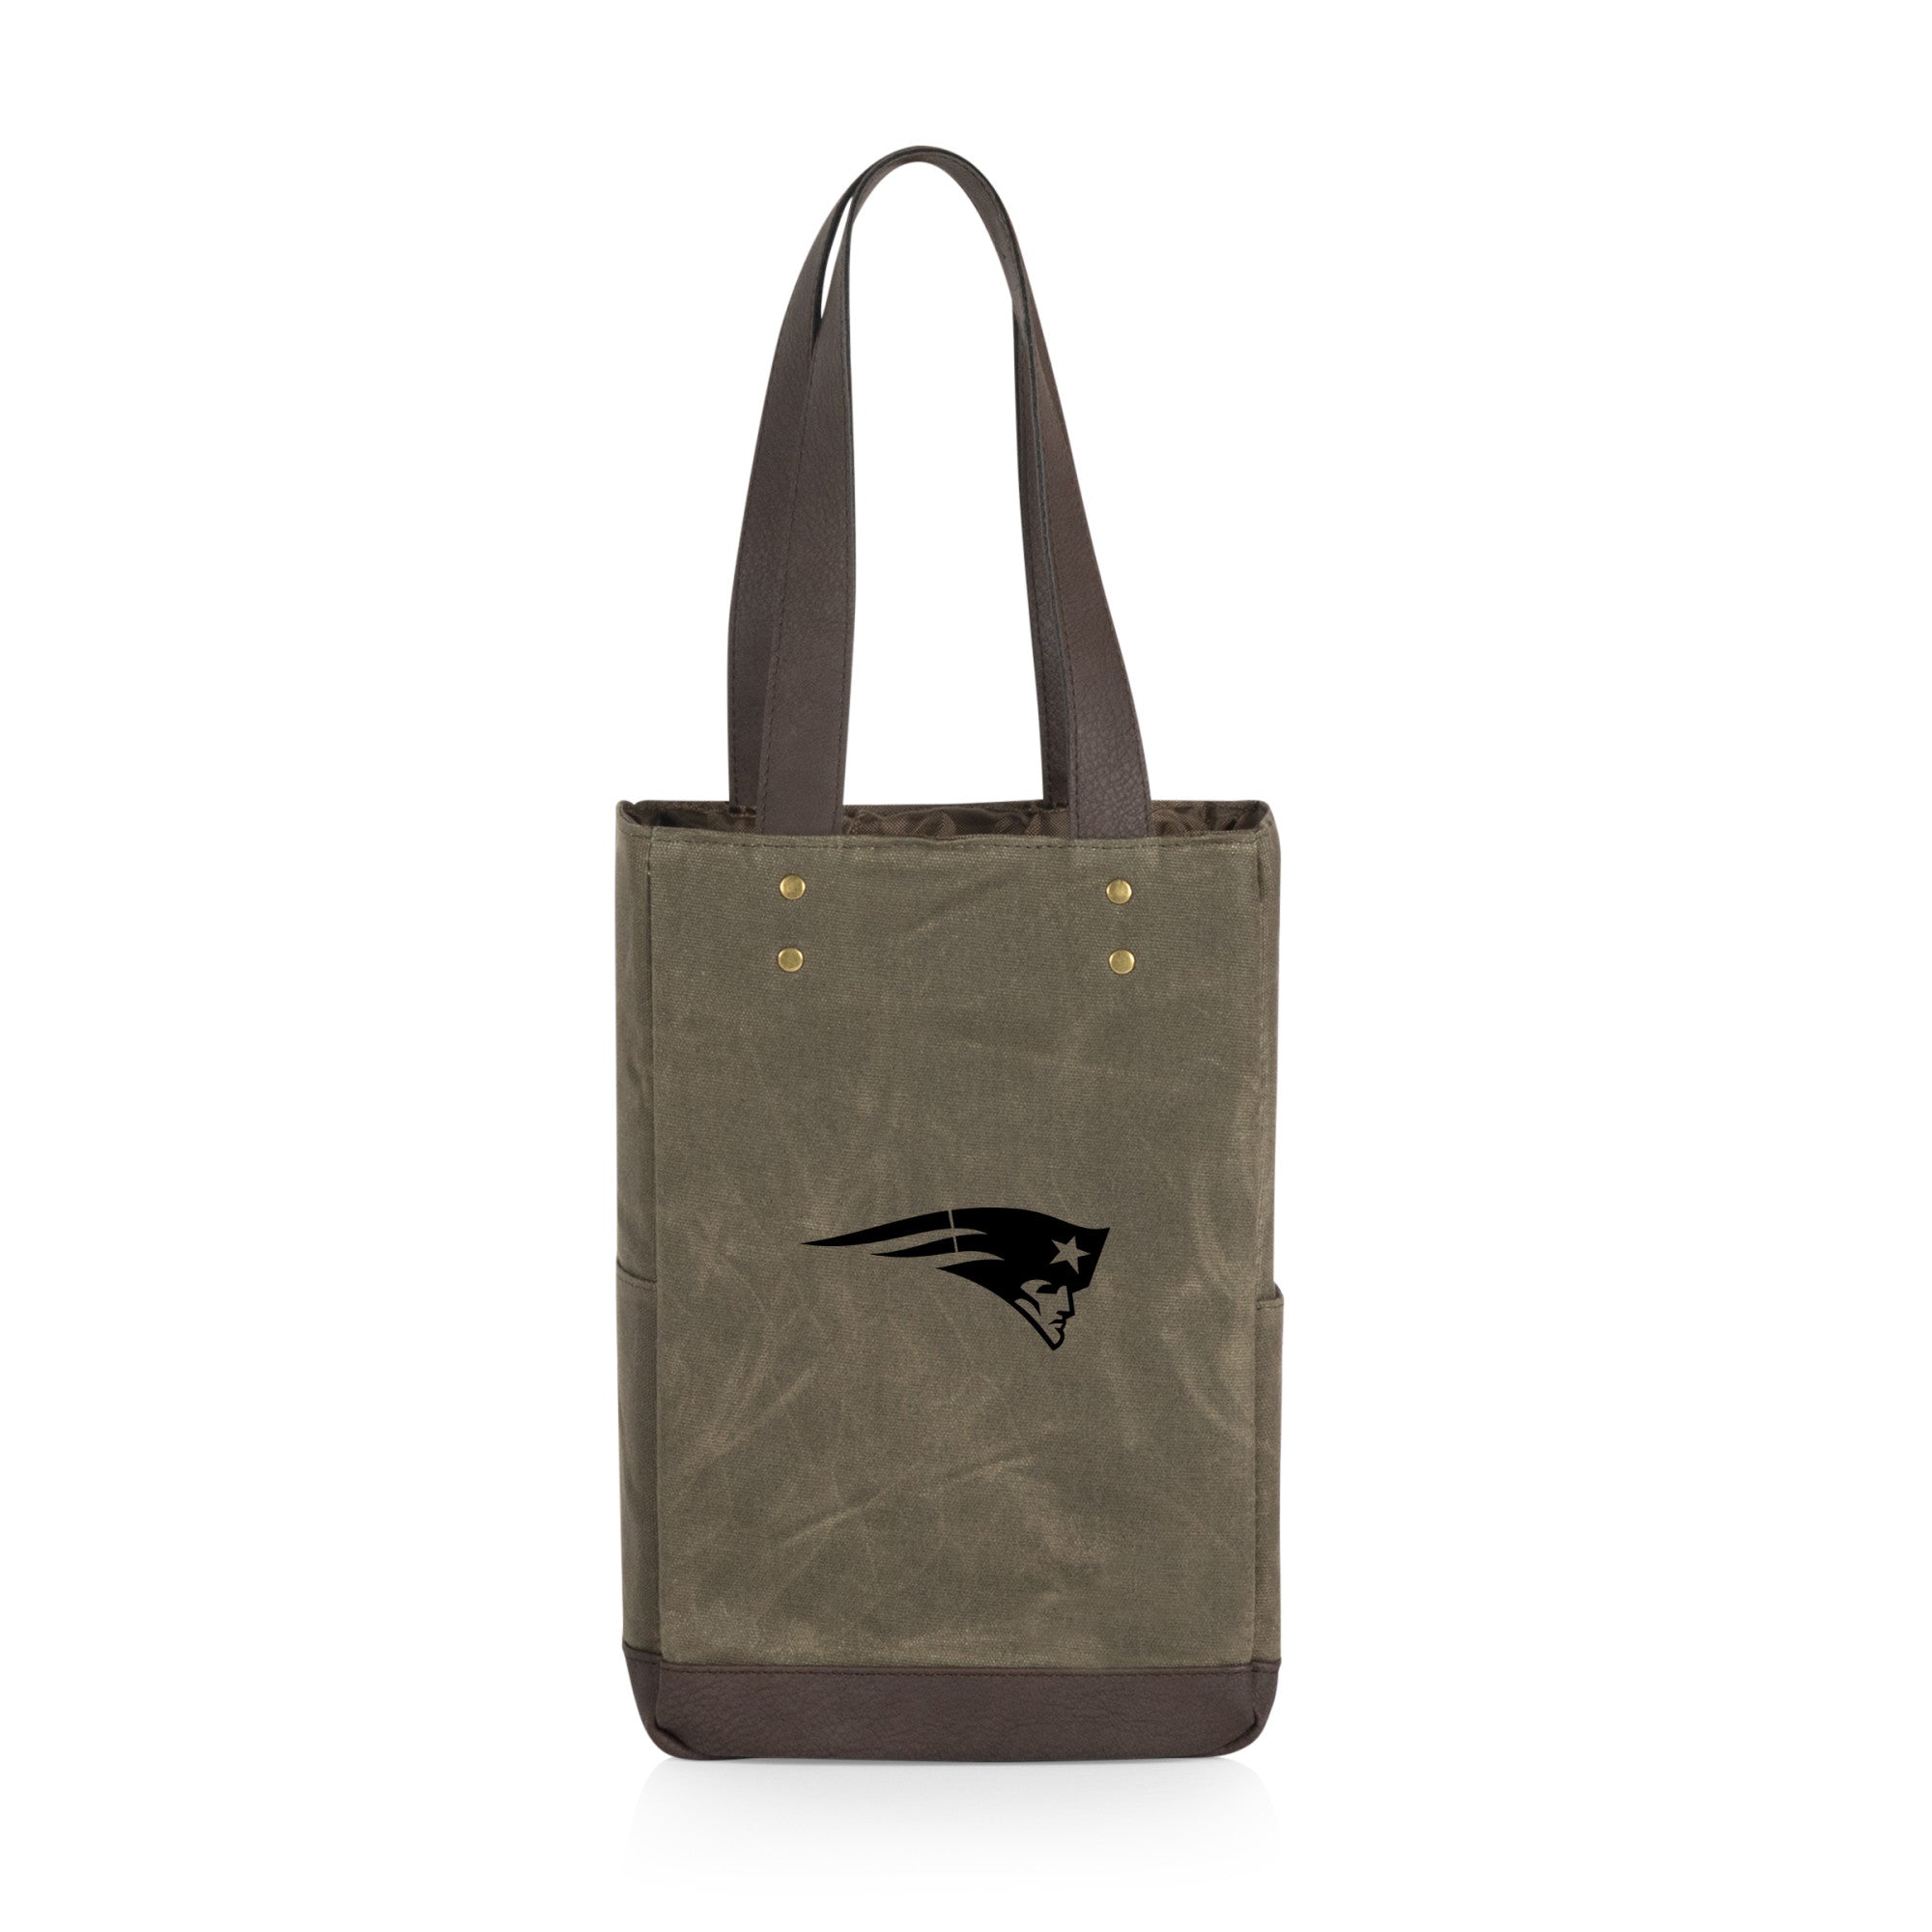 New England Patriots - 2 Bottle Insulated Wine Cooler Bag, (Khaki Green with Beige Accents)